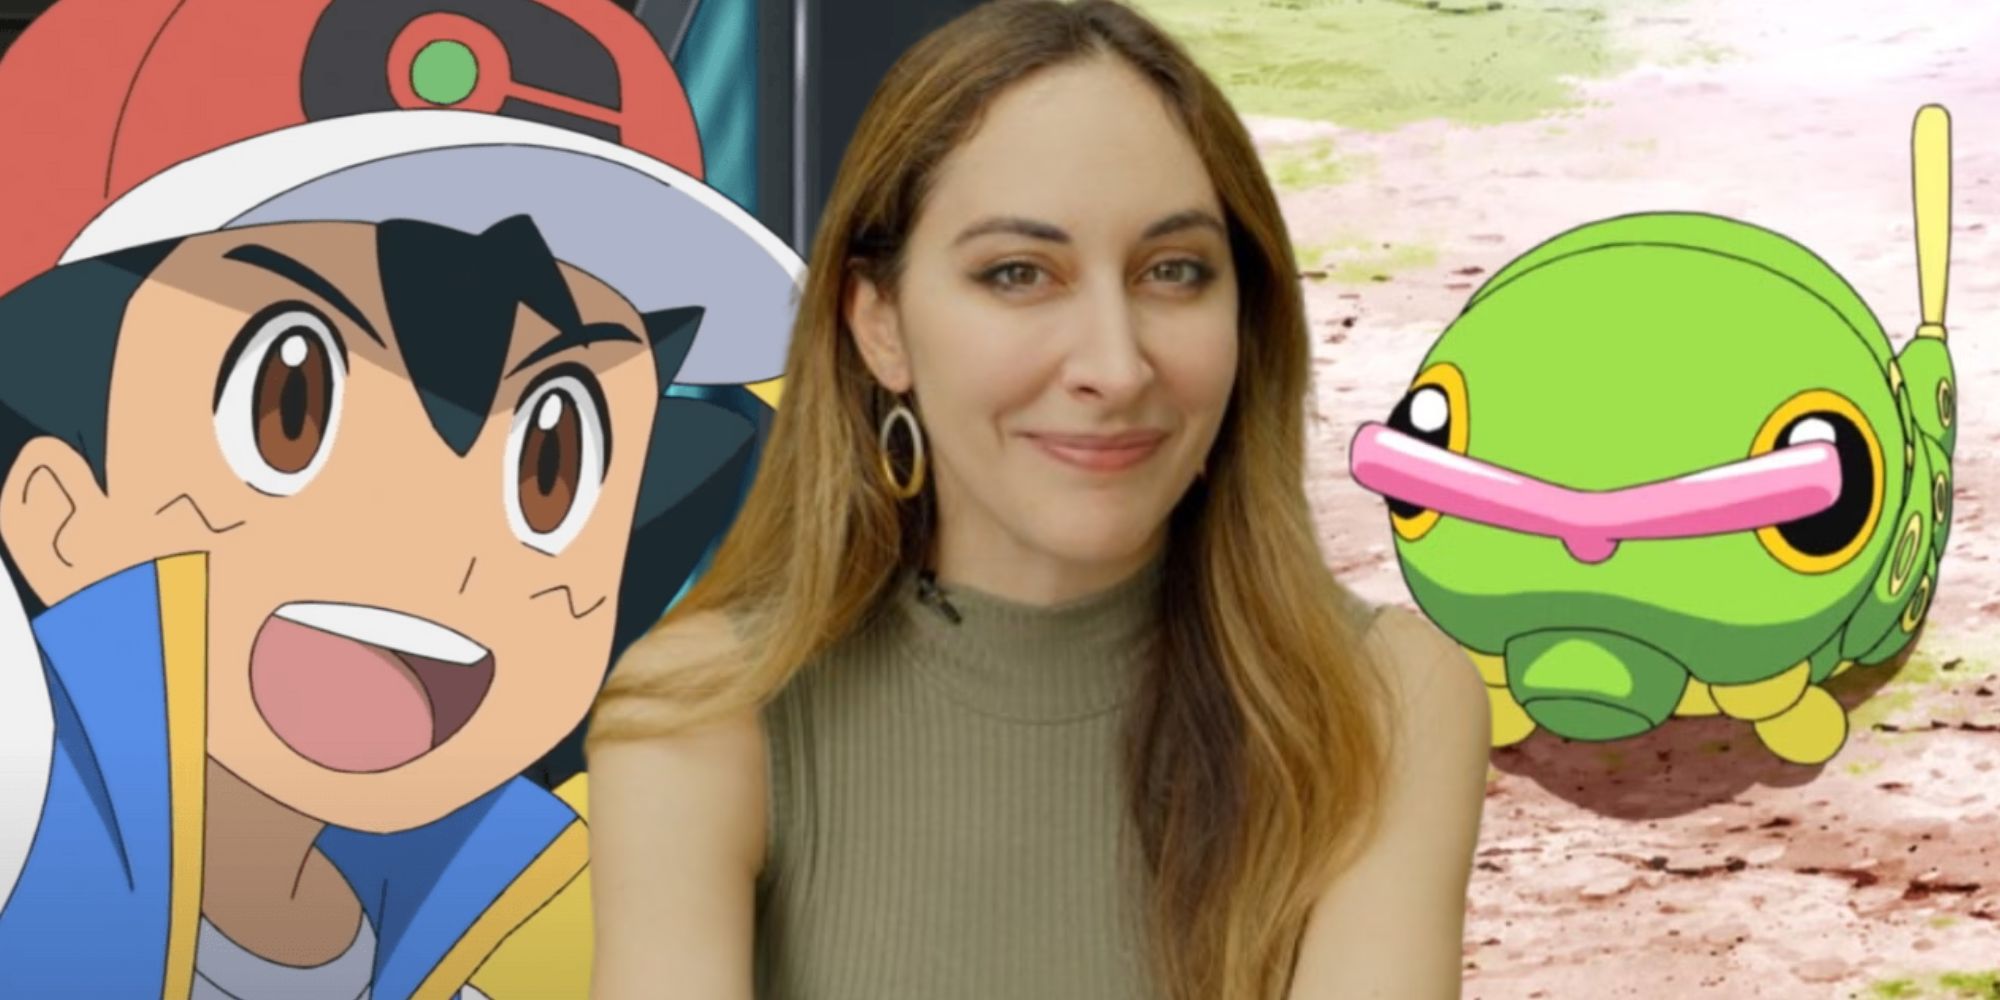 Ash and Caterpie in the Pokemon anime next to voice actor Sarah Natochenny